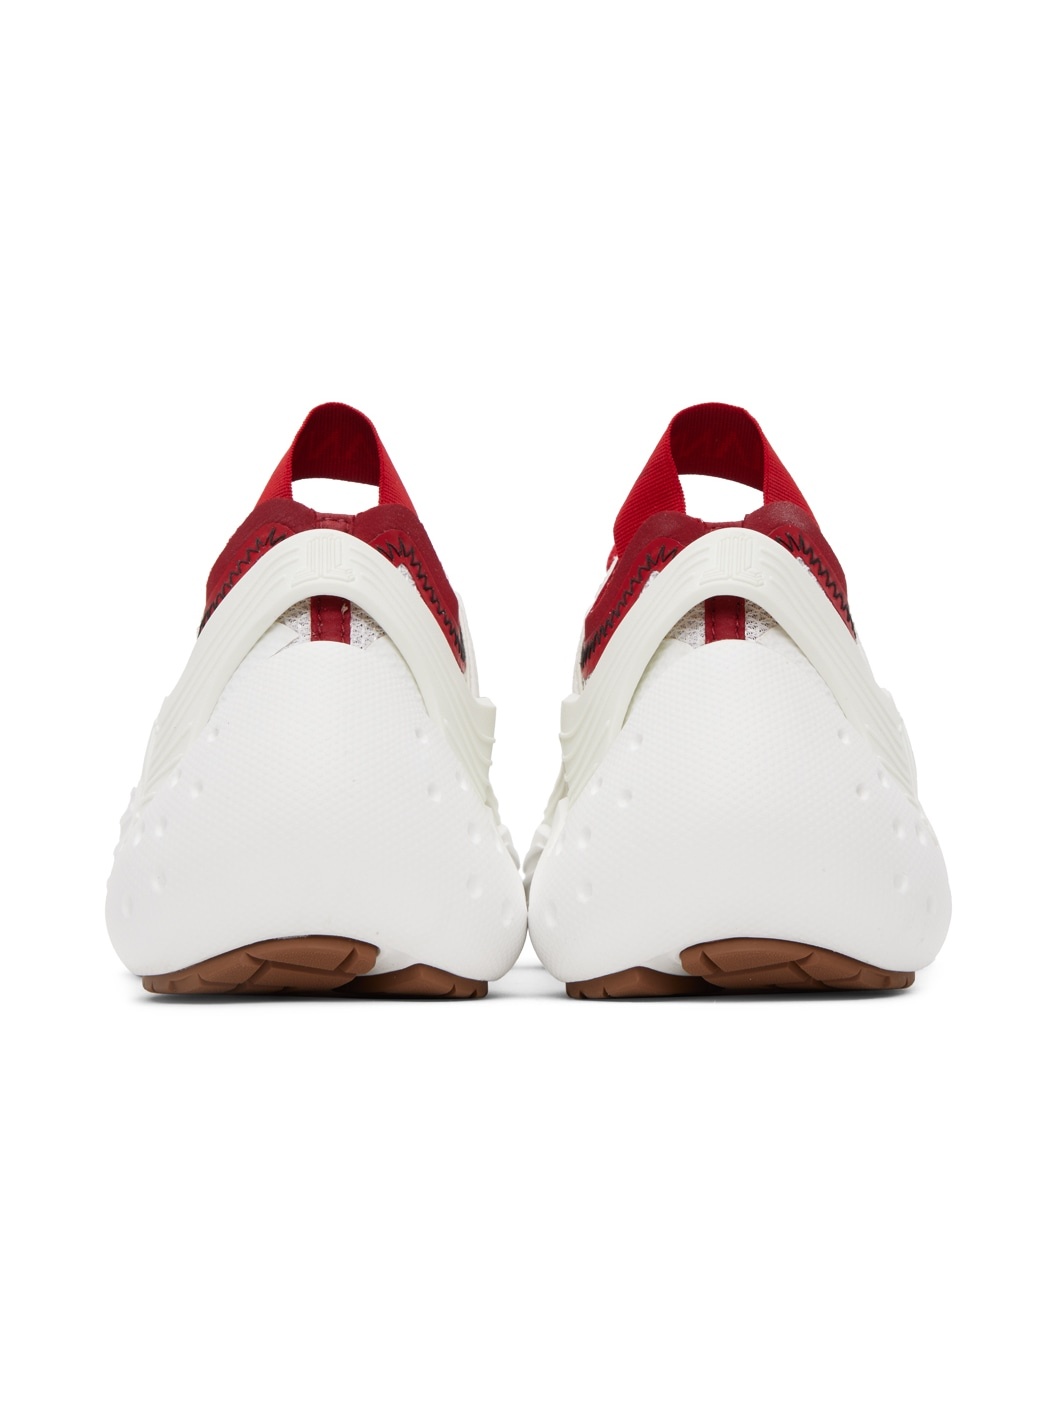 SSENSE Exclusive Red & White Flash-X Sneakers - 2